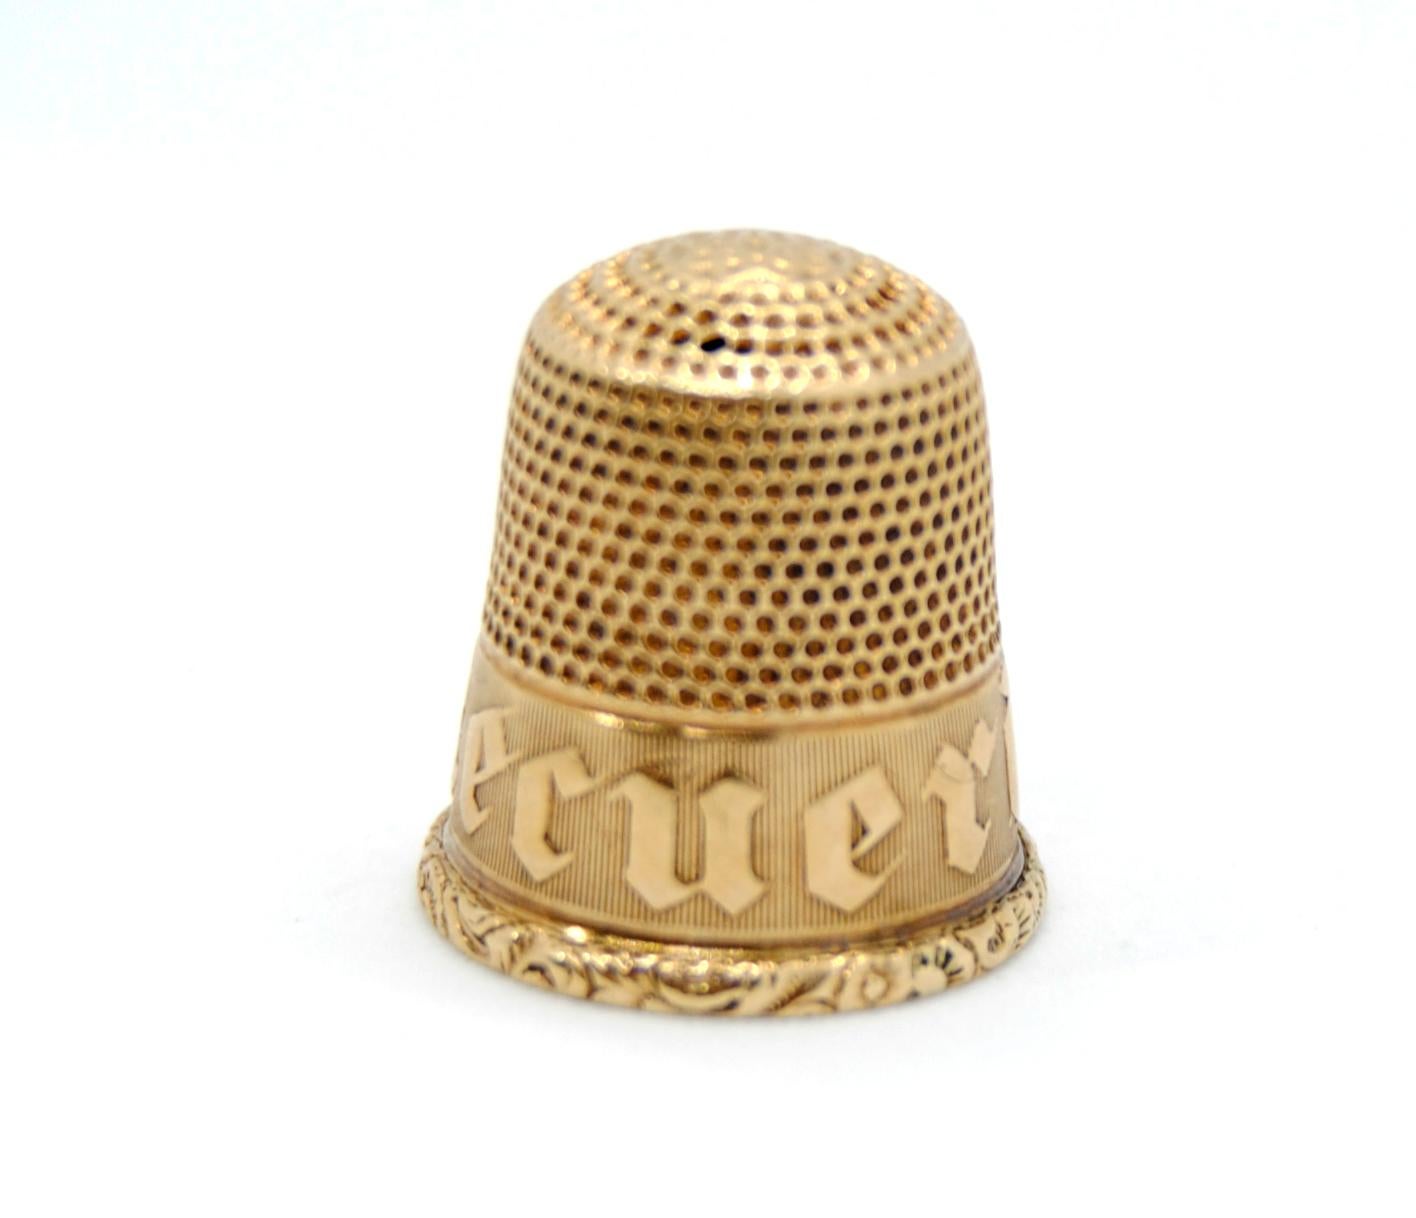 Fine antique thimble  crafted in 14 ct yellow gold.
The thimble has a pitted crown and a ribbed, polka dot design around the main body.
The rim of this Victorian thimble has engraved * RECUERDO* meaning *For Memory*  in Spanish 

